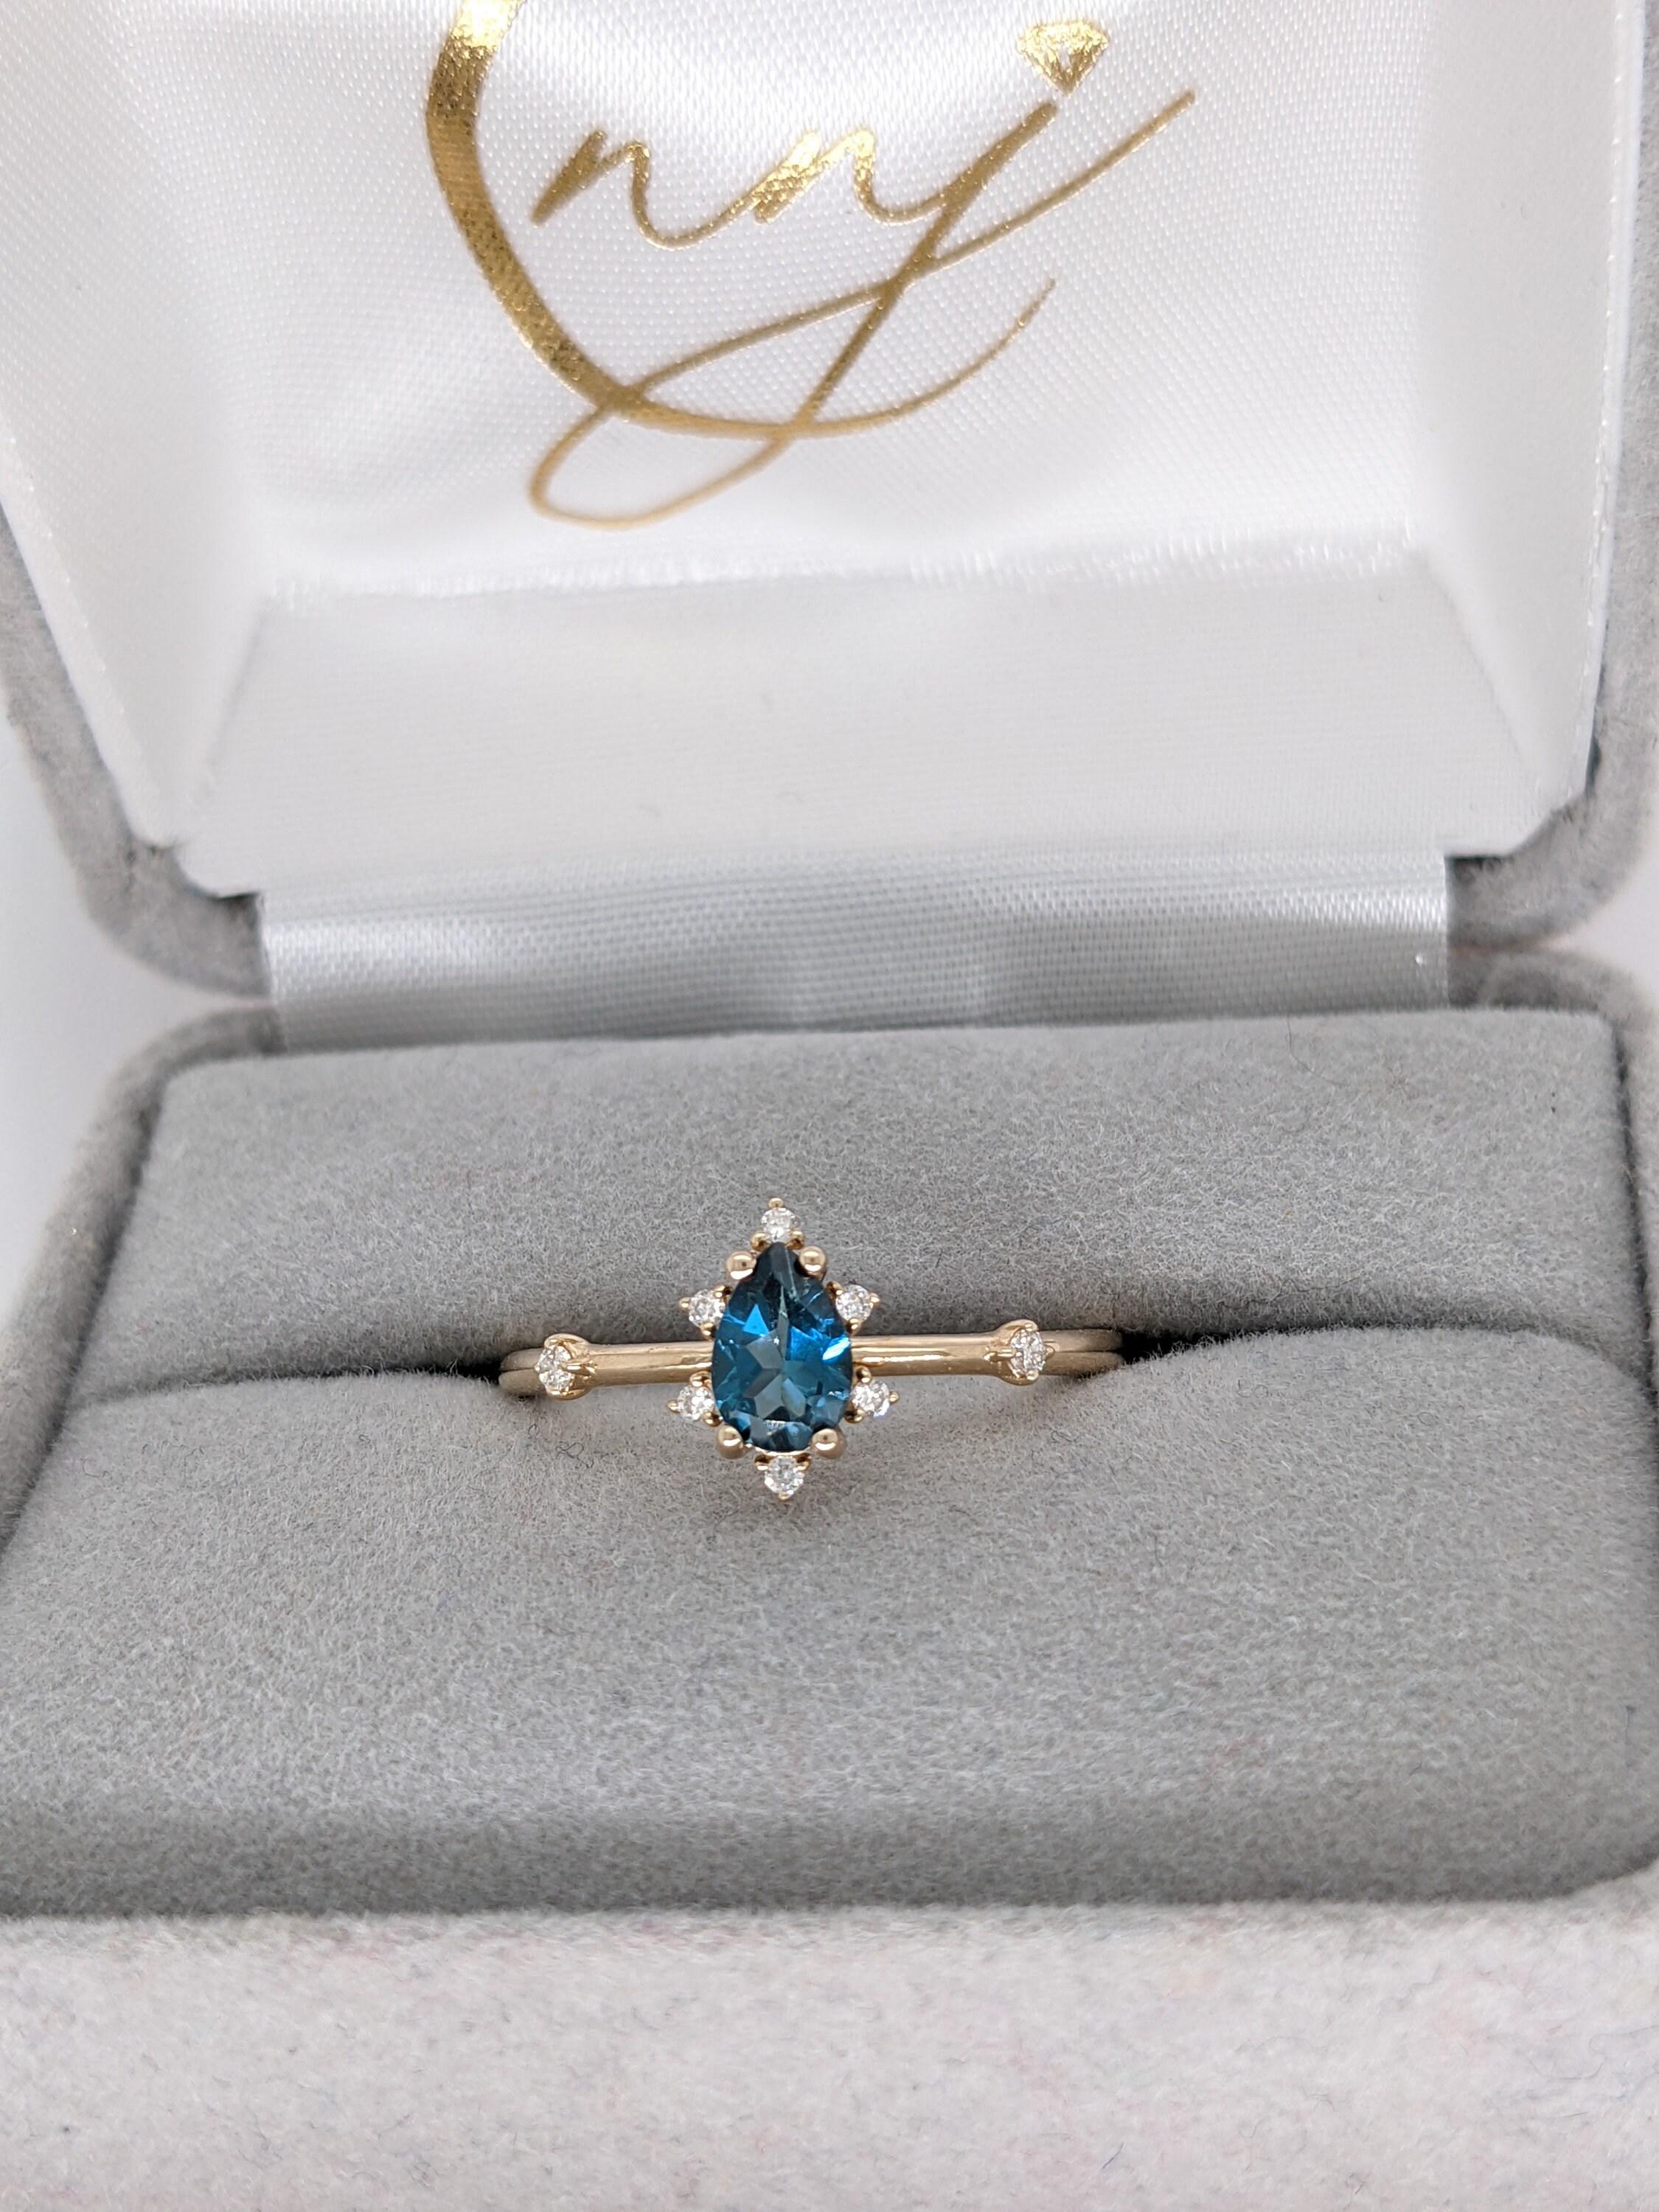 London Blue Topaz w Diamond Accents in 14k Solid Yellow Gold Pear Shape 6x4mm 1